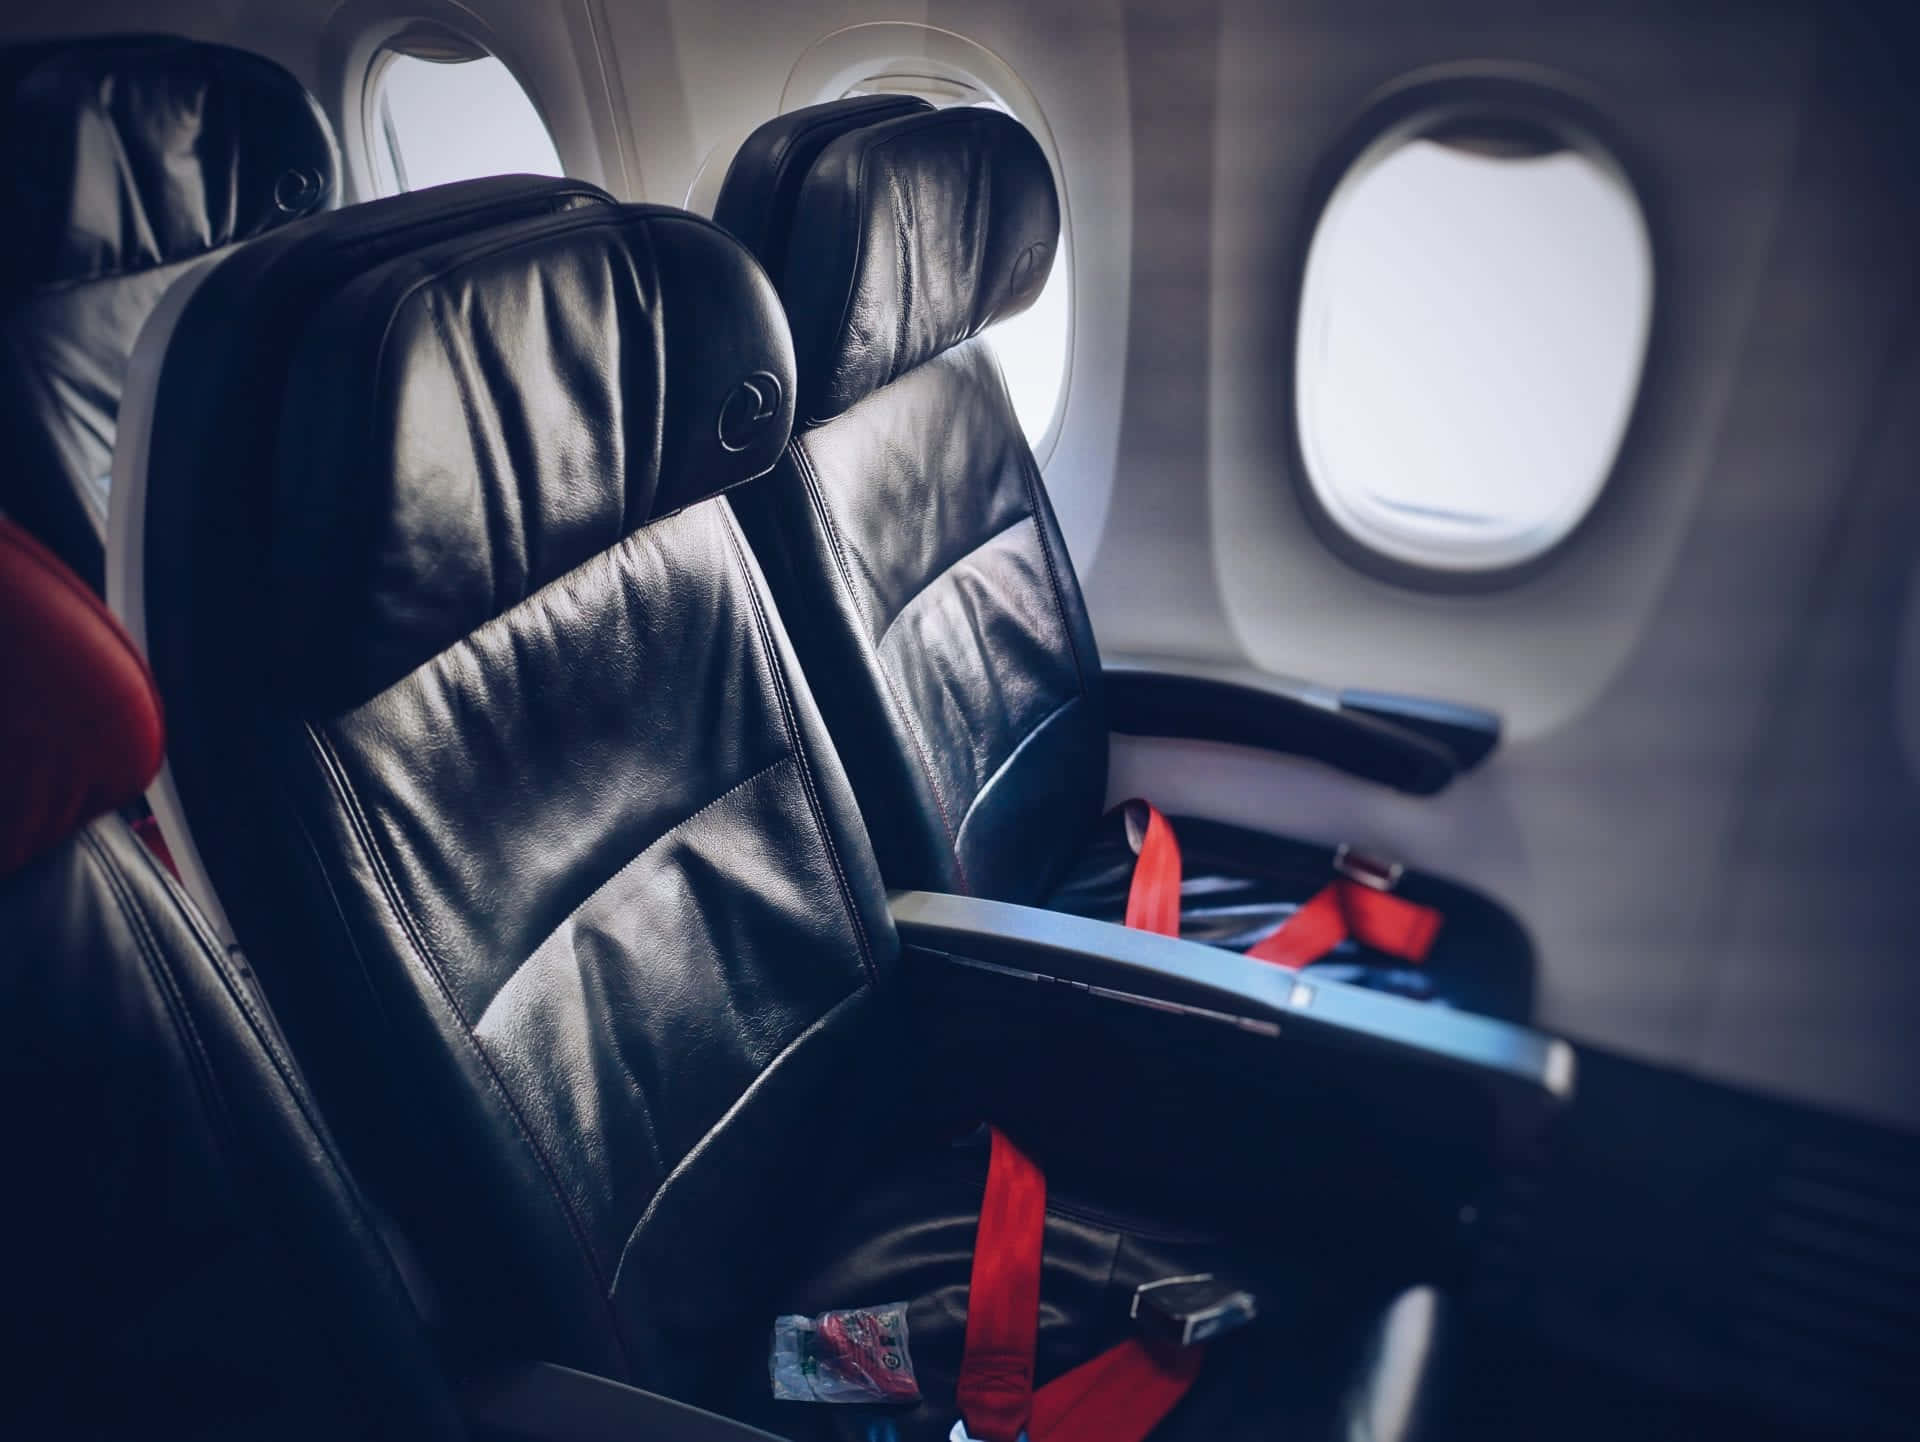 Black Leather Seat Inside Airplane Wallpaper